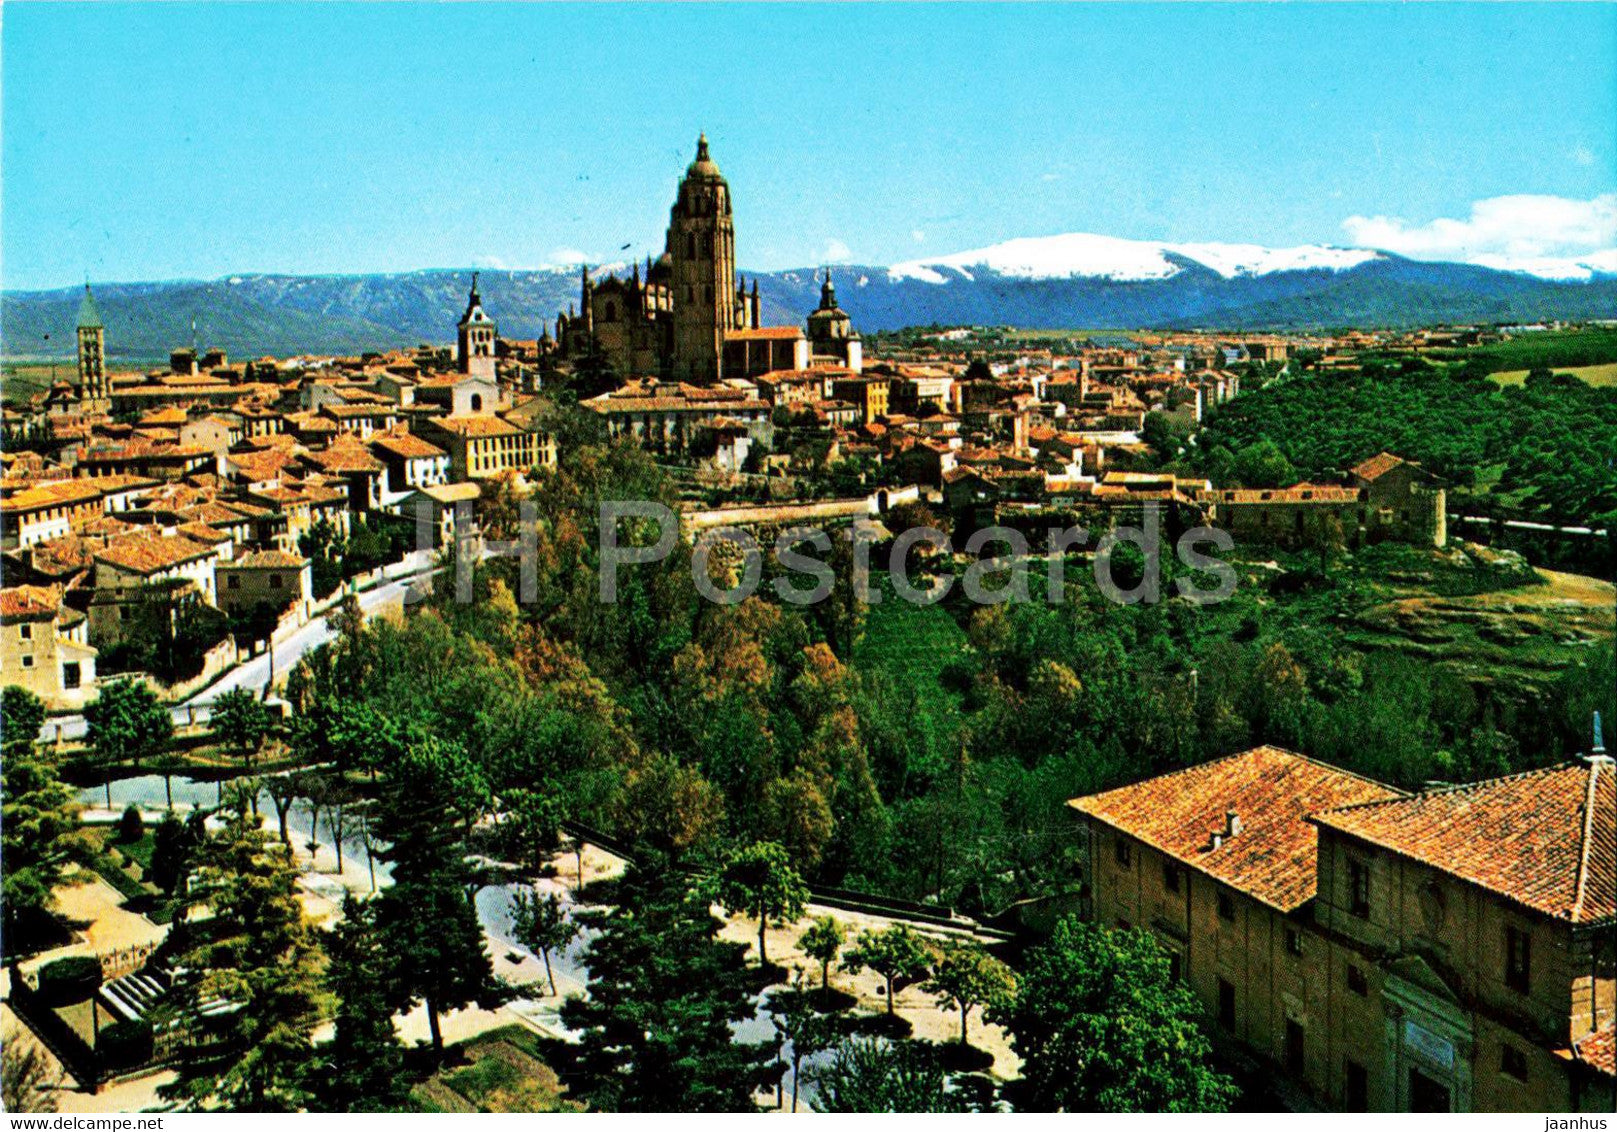 Segovia - Panoramica y Catedral - cathedral - 810 - Spain - unused - JH Postcards